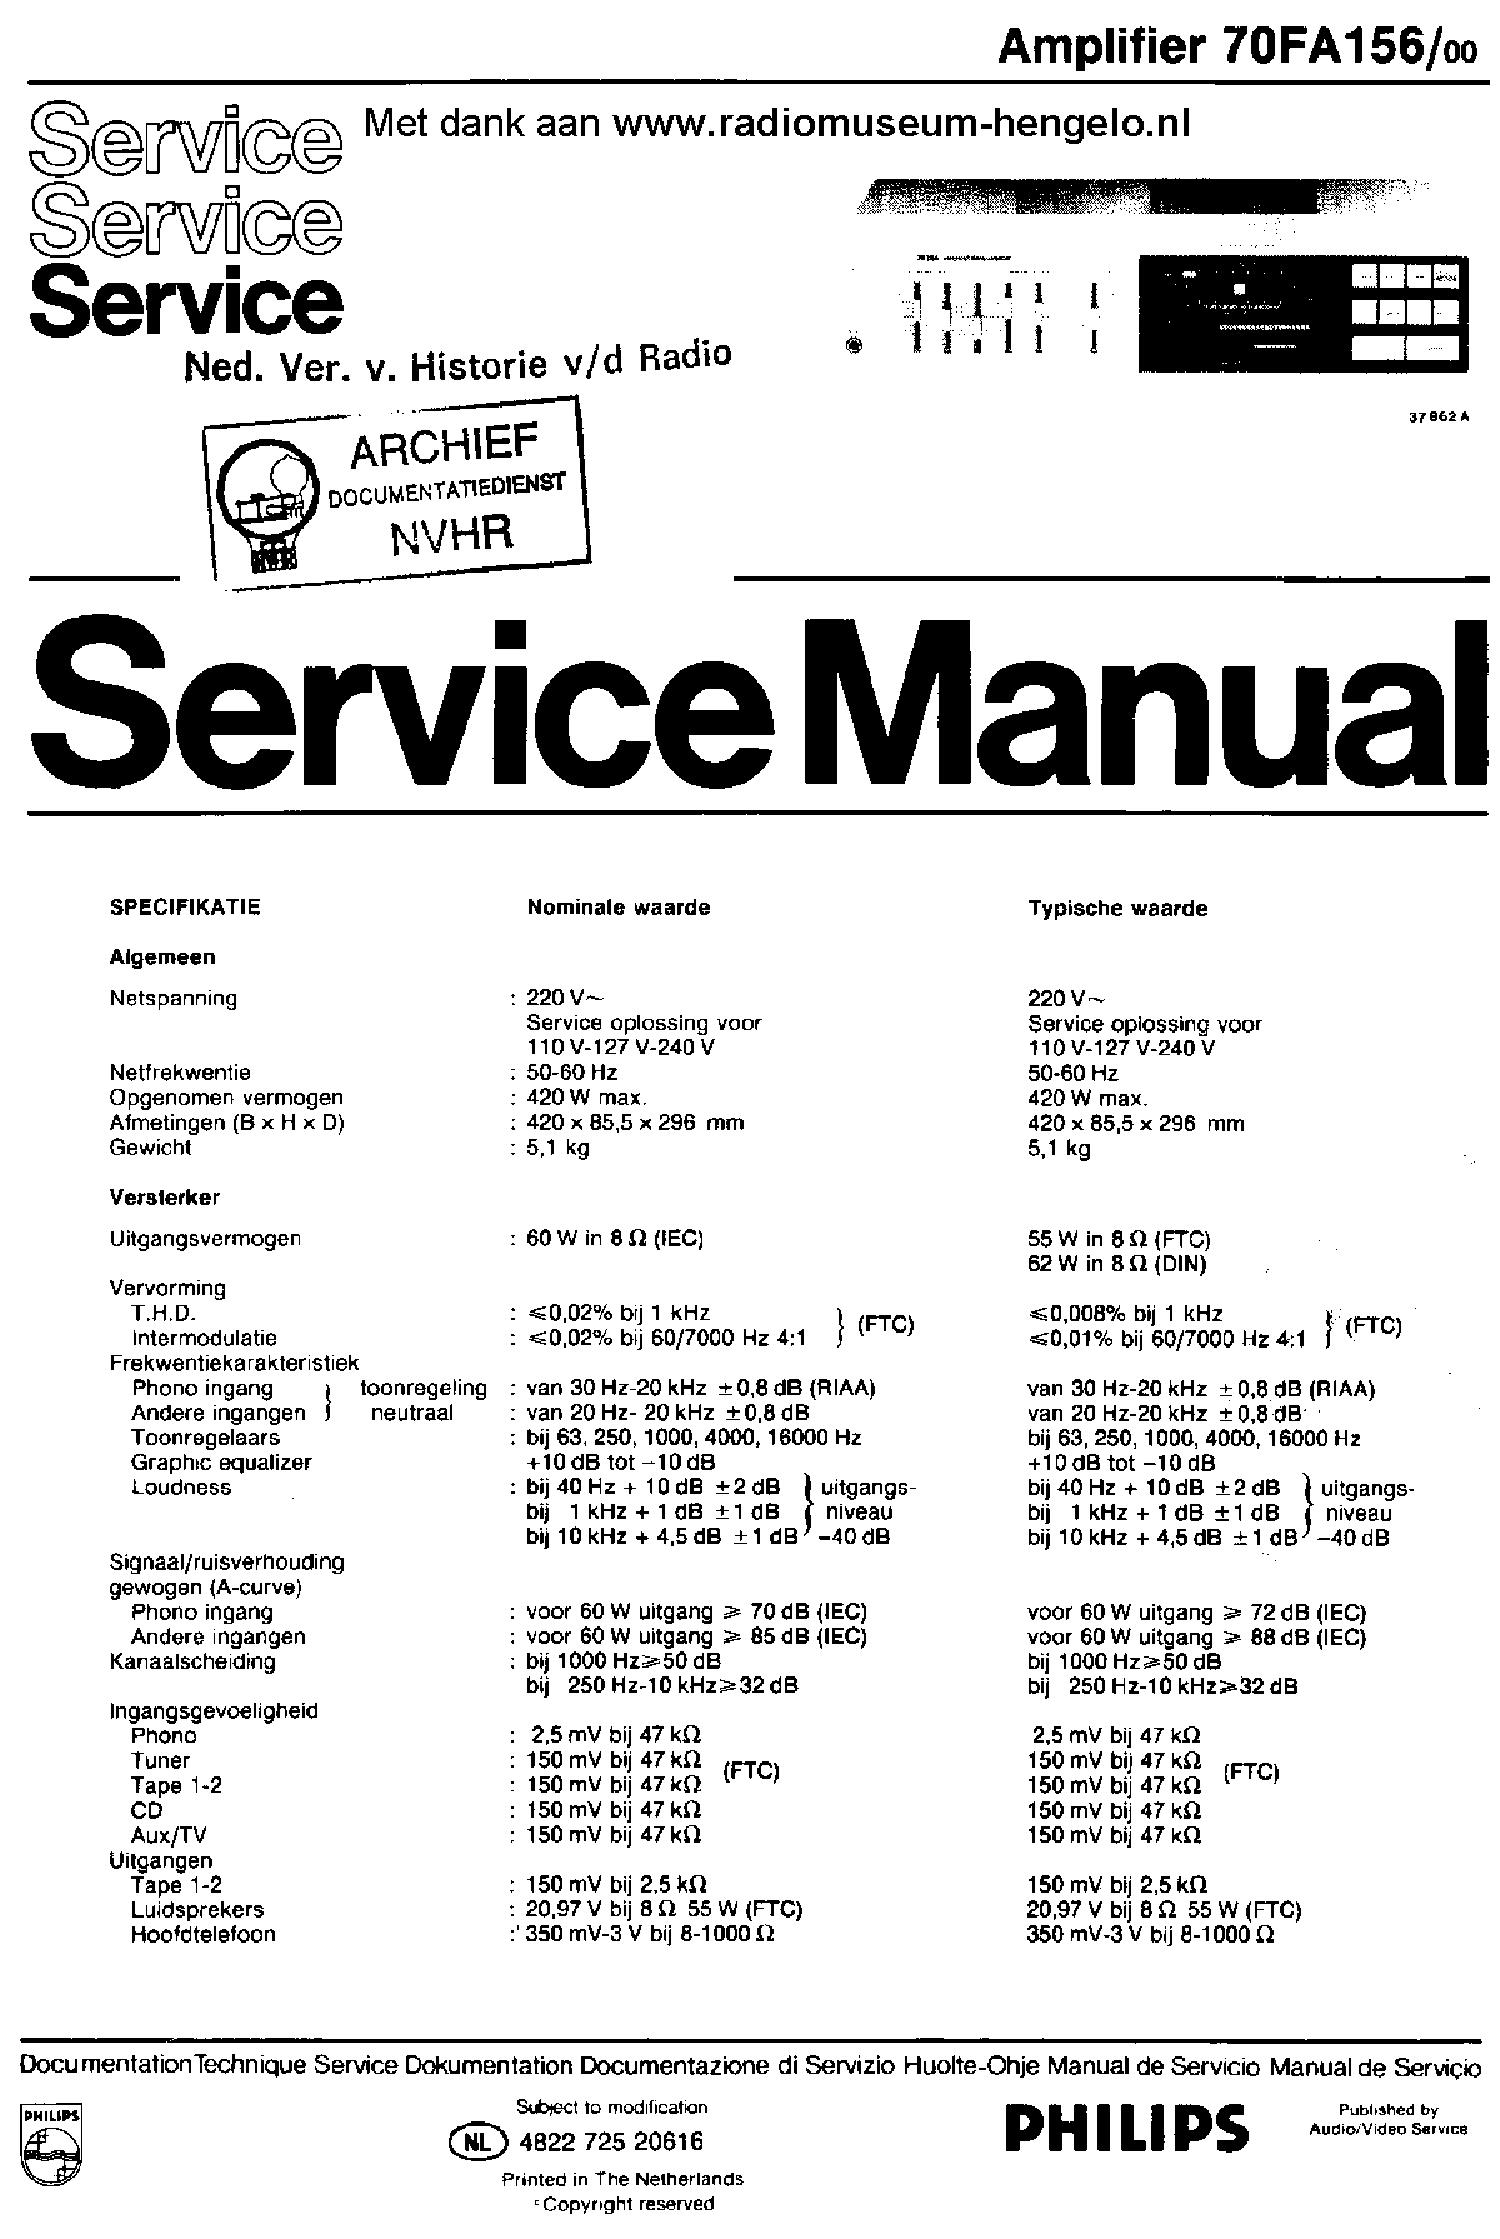 PHILIPS 70FA156-00 2X60W AMPLIFIER SM service manual (1st page)